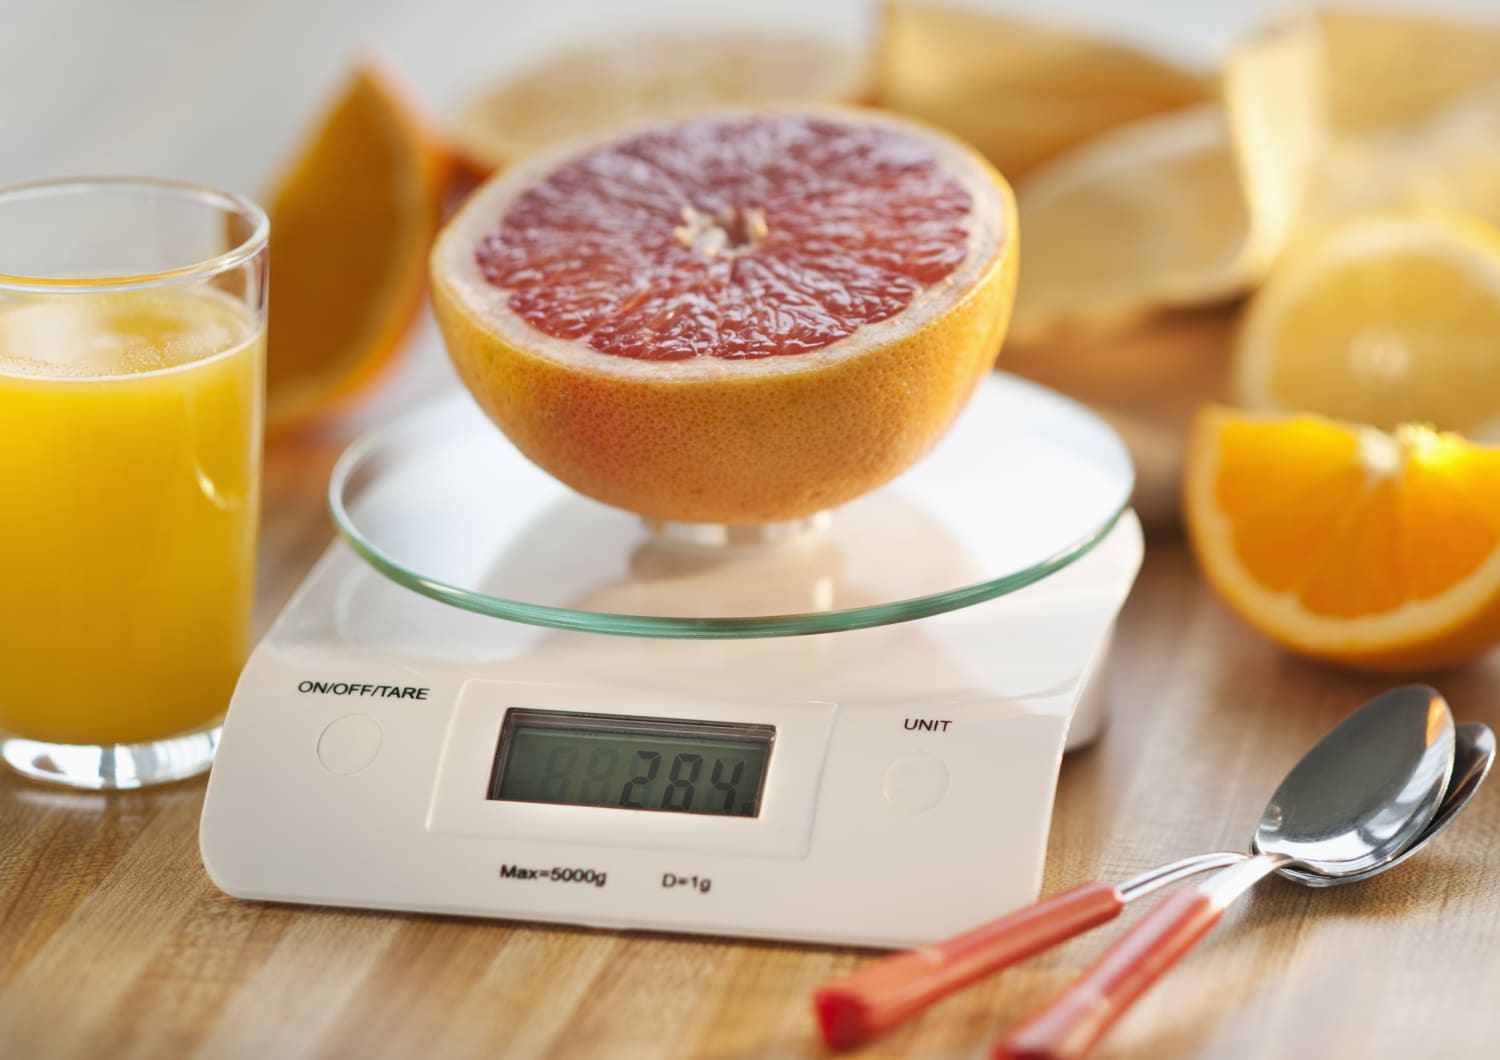 Not losing weight? Try weighing your food for a week